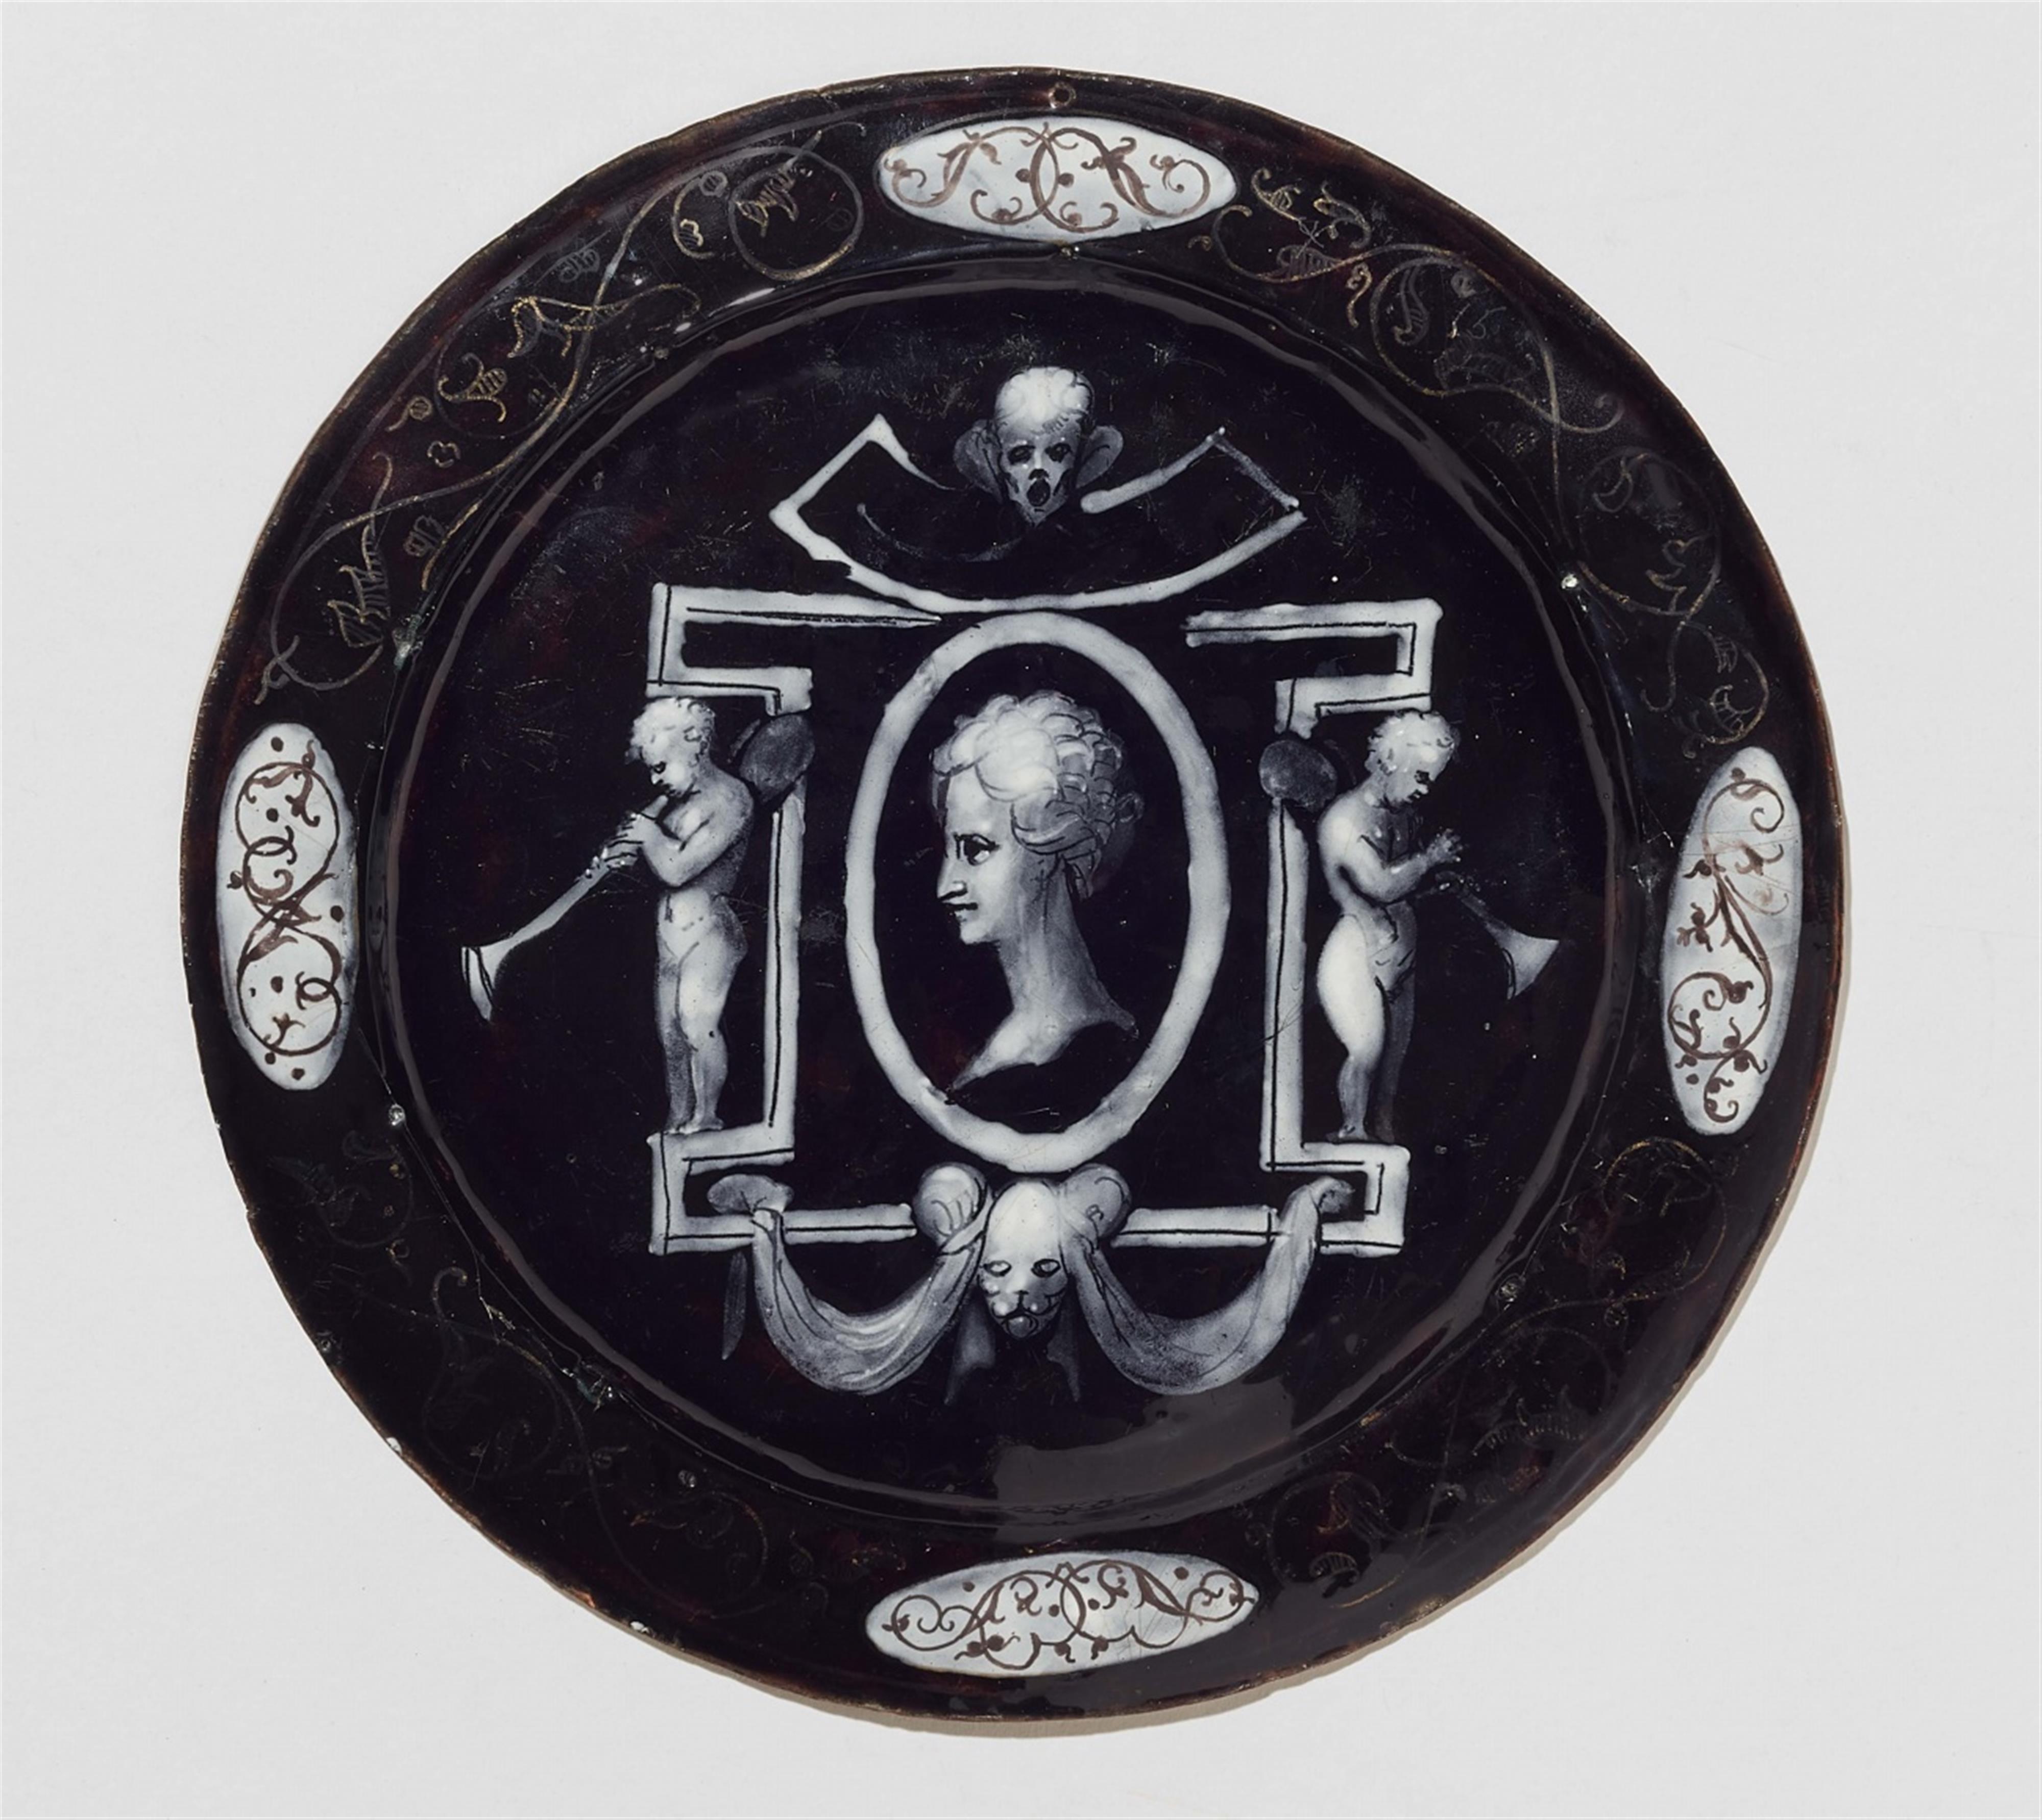 A Limoges enamel astrological plate with Capricorn - image-2